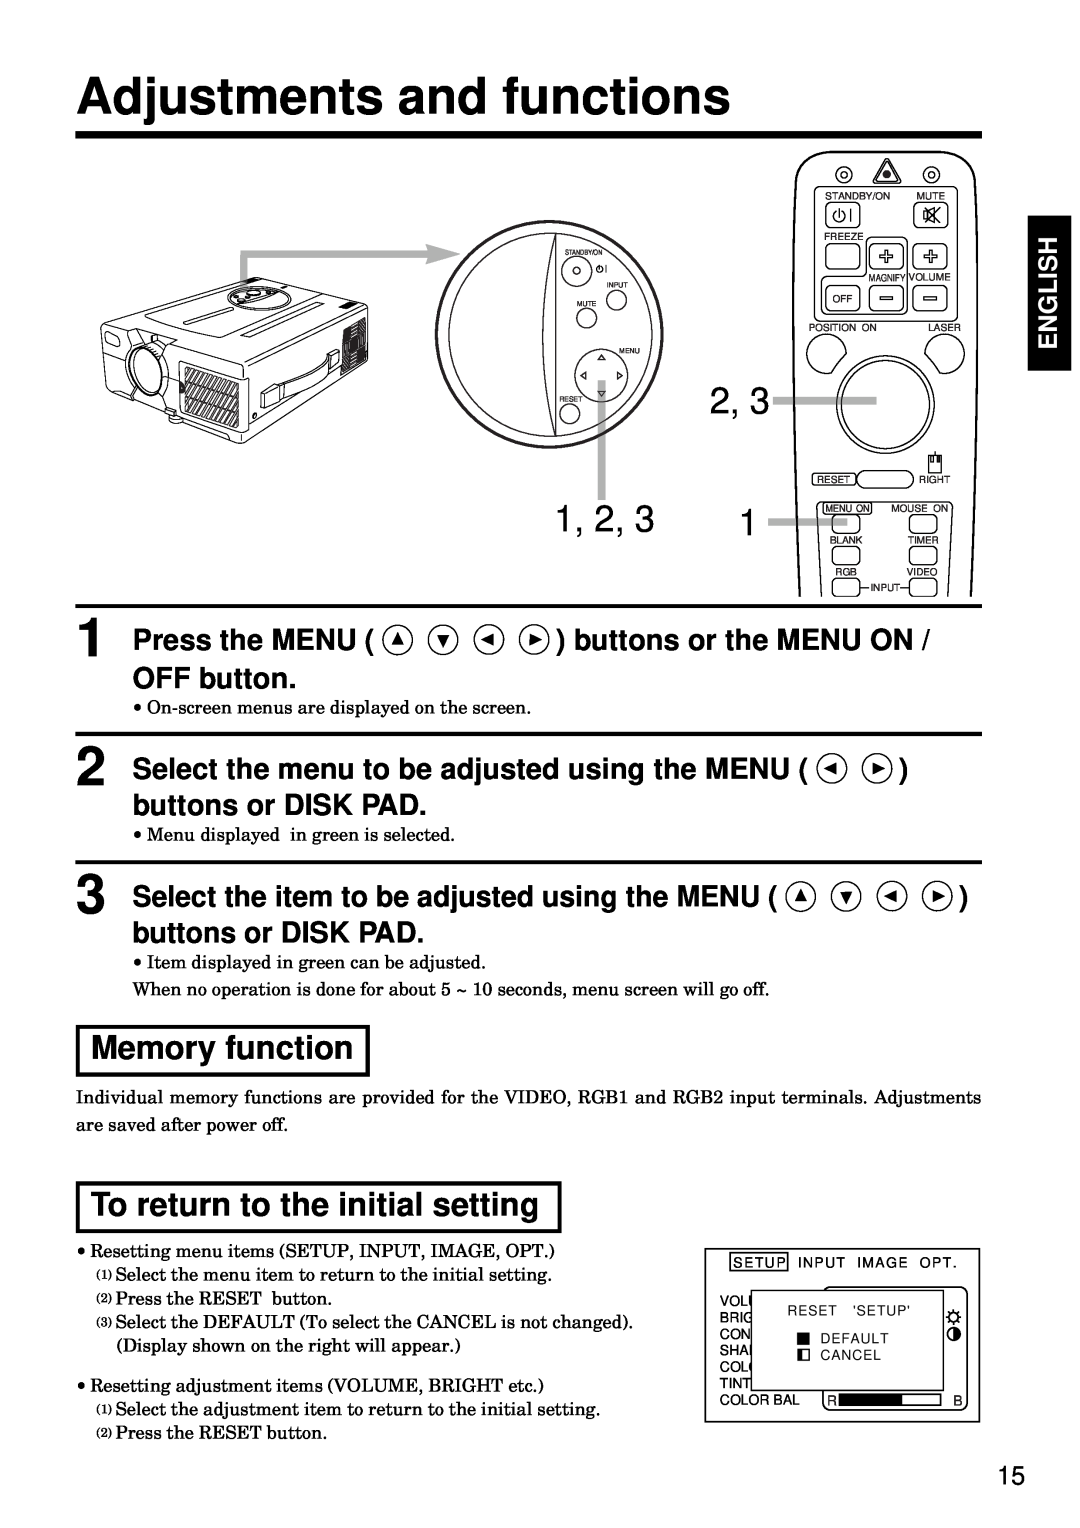 BOXLIGHT MP-93i Adjustments and functions, Memory function, To return to the initial setting, Press the MENU, OFF button 